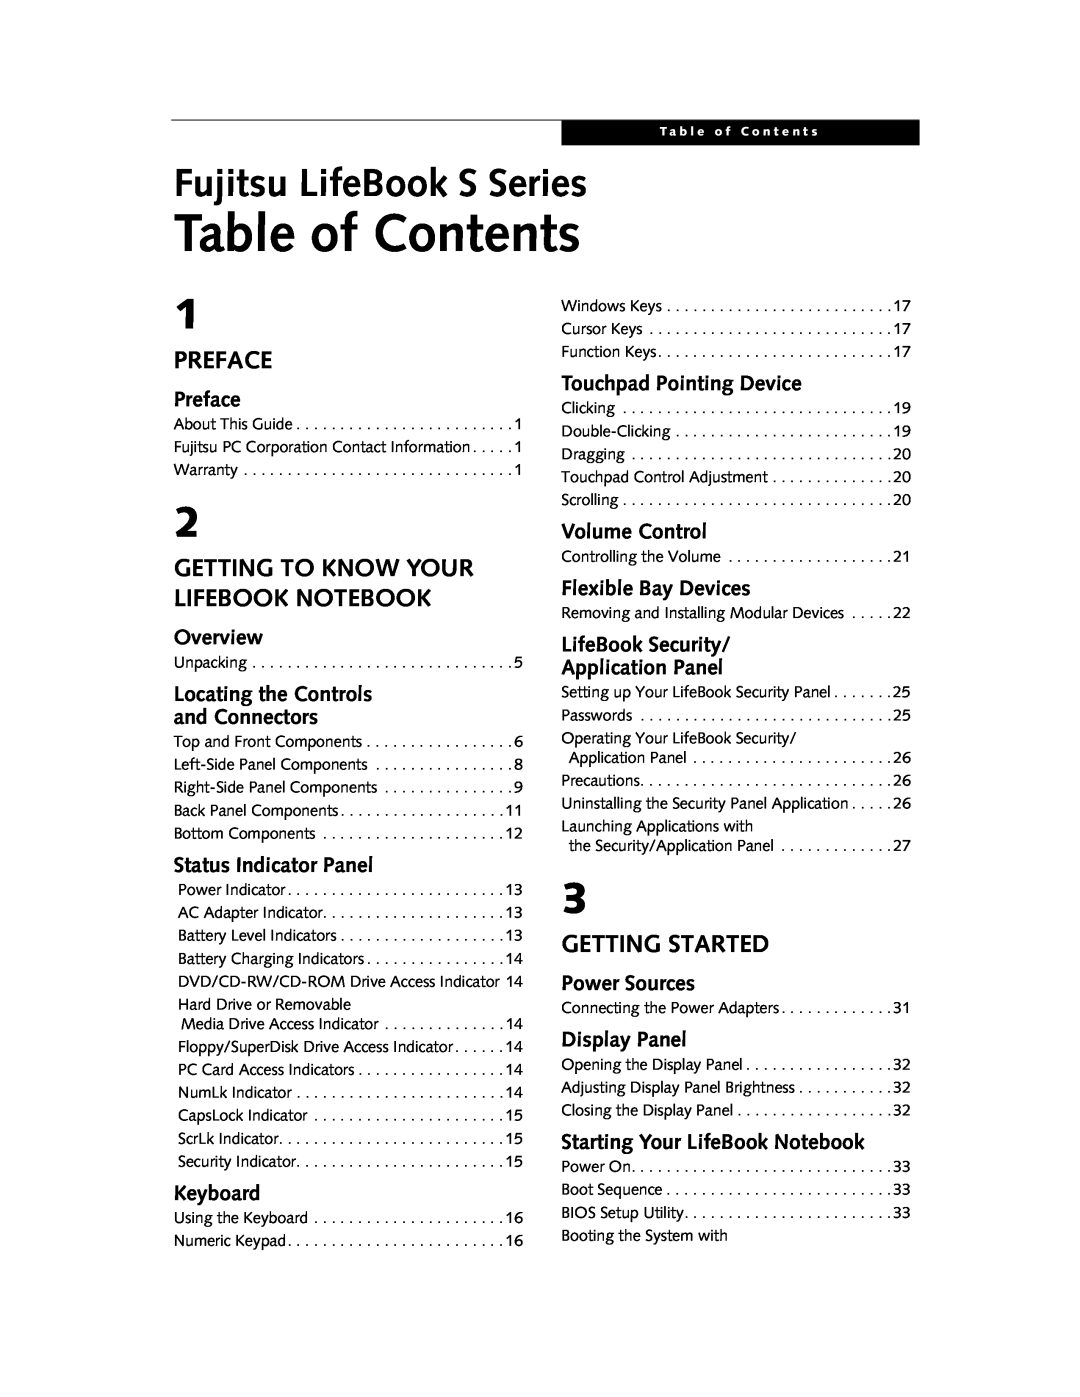 Fujitsu DVD Player manual Table of Contents, Preface, Getting Started, Getting To Know Your Lifebook Notebook 